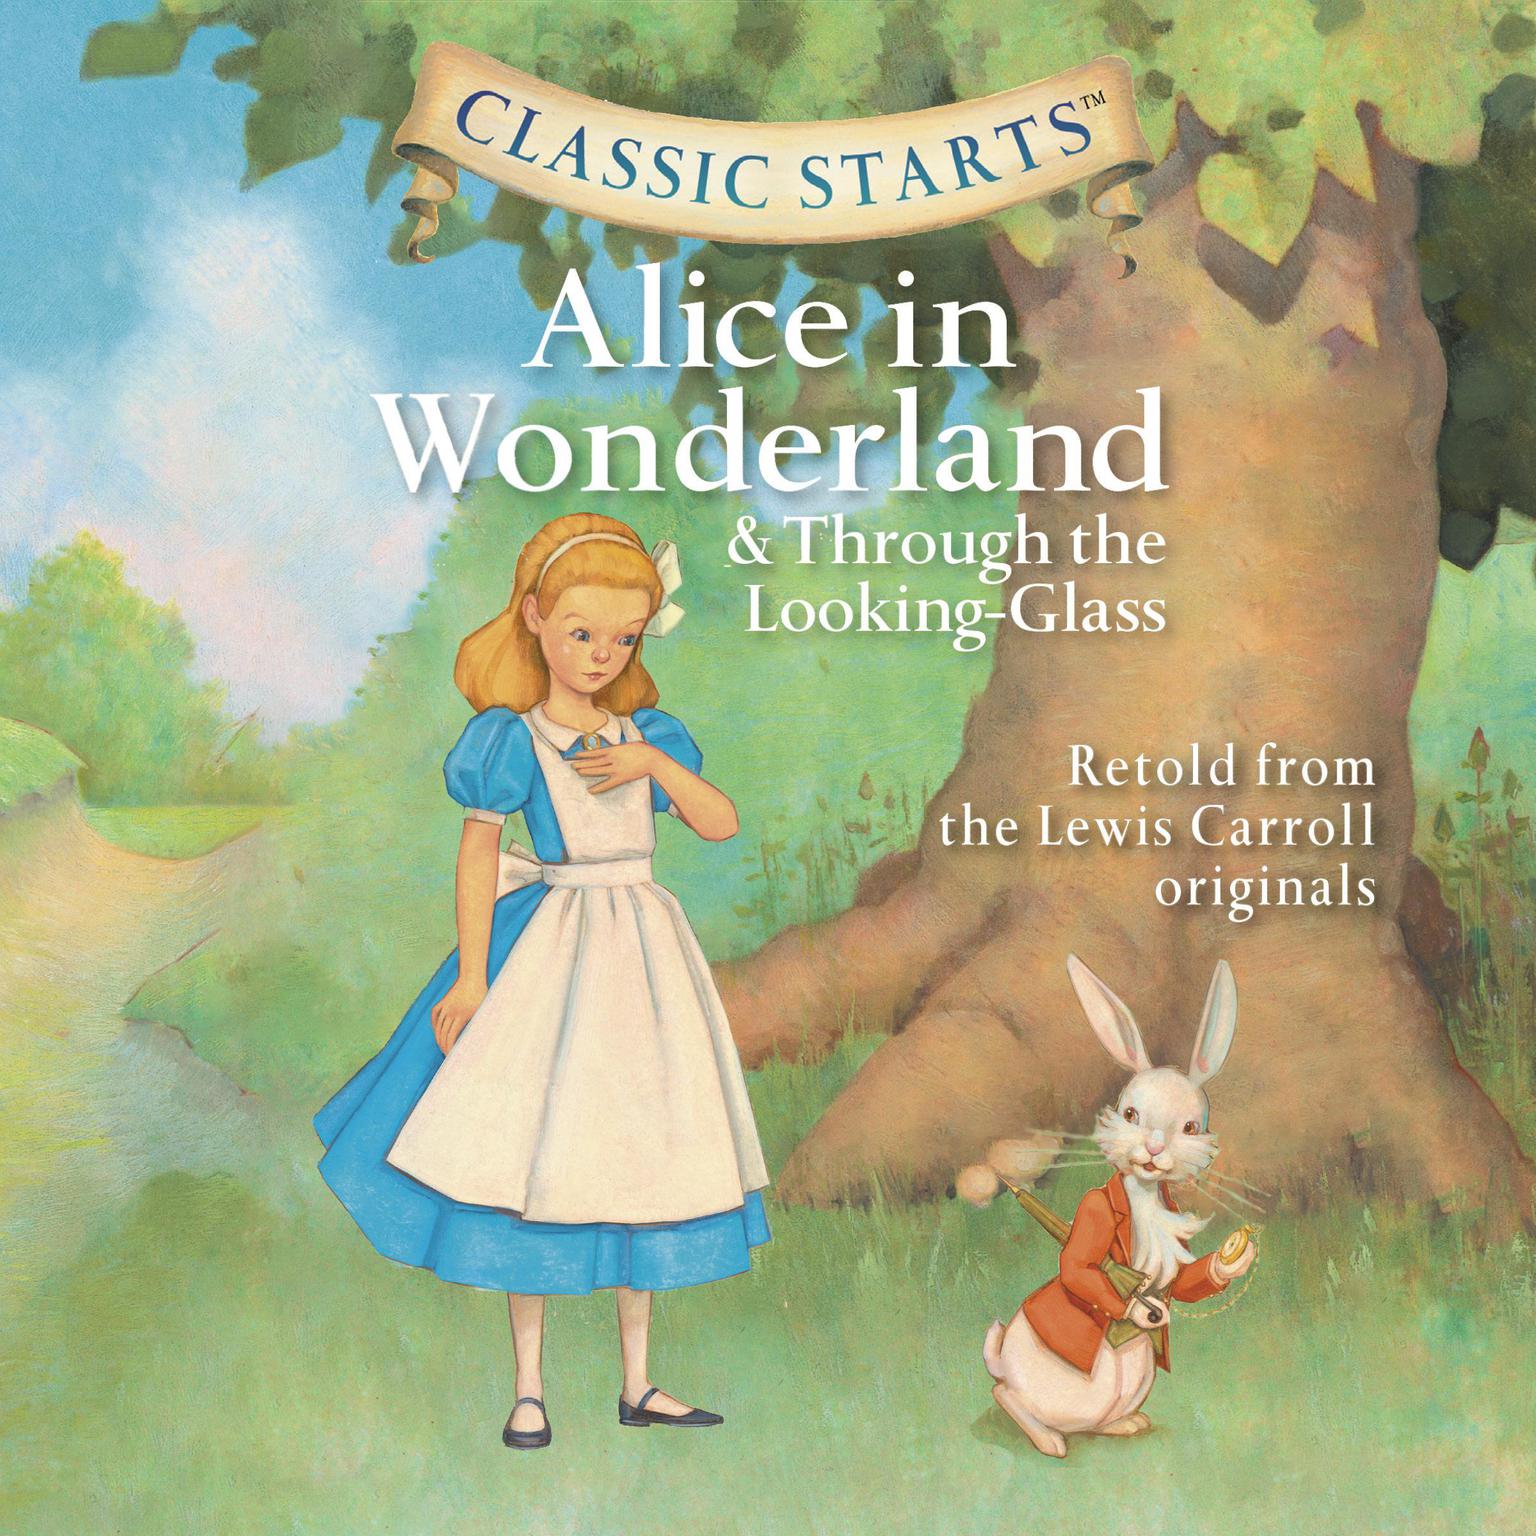 book review of alice in wonderland wikipedia